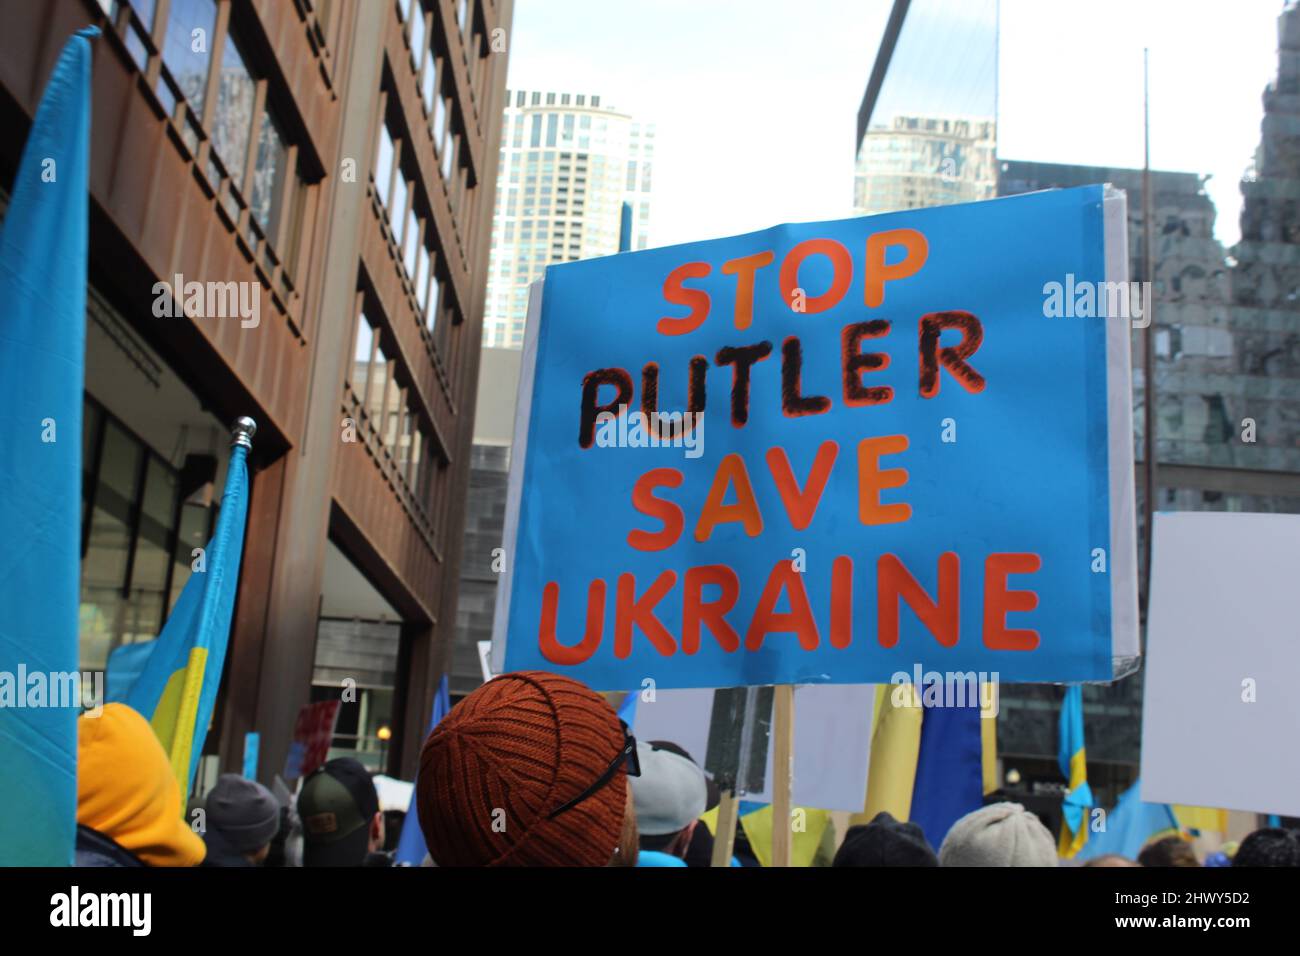 Save Putler Save Ukraine protest sign at Daley Plaza in Chicago Stock Photo